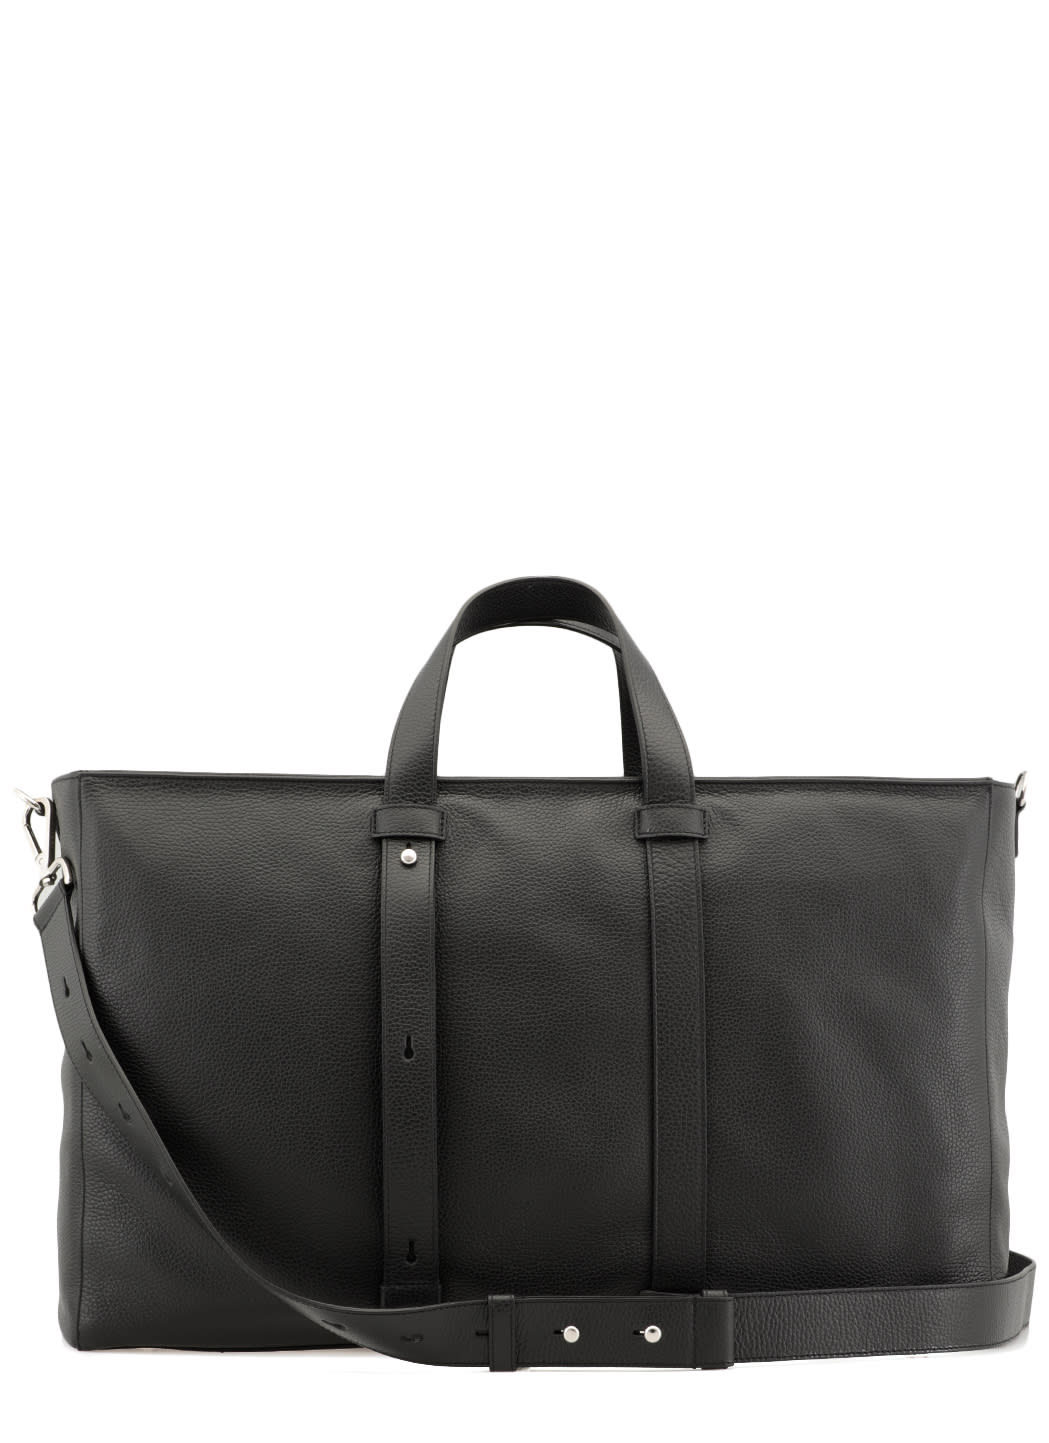 Orciani Pebbled Leather Bag